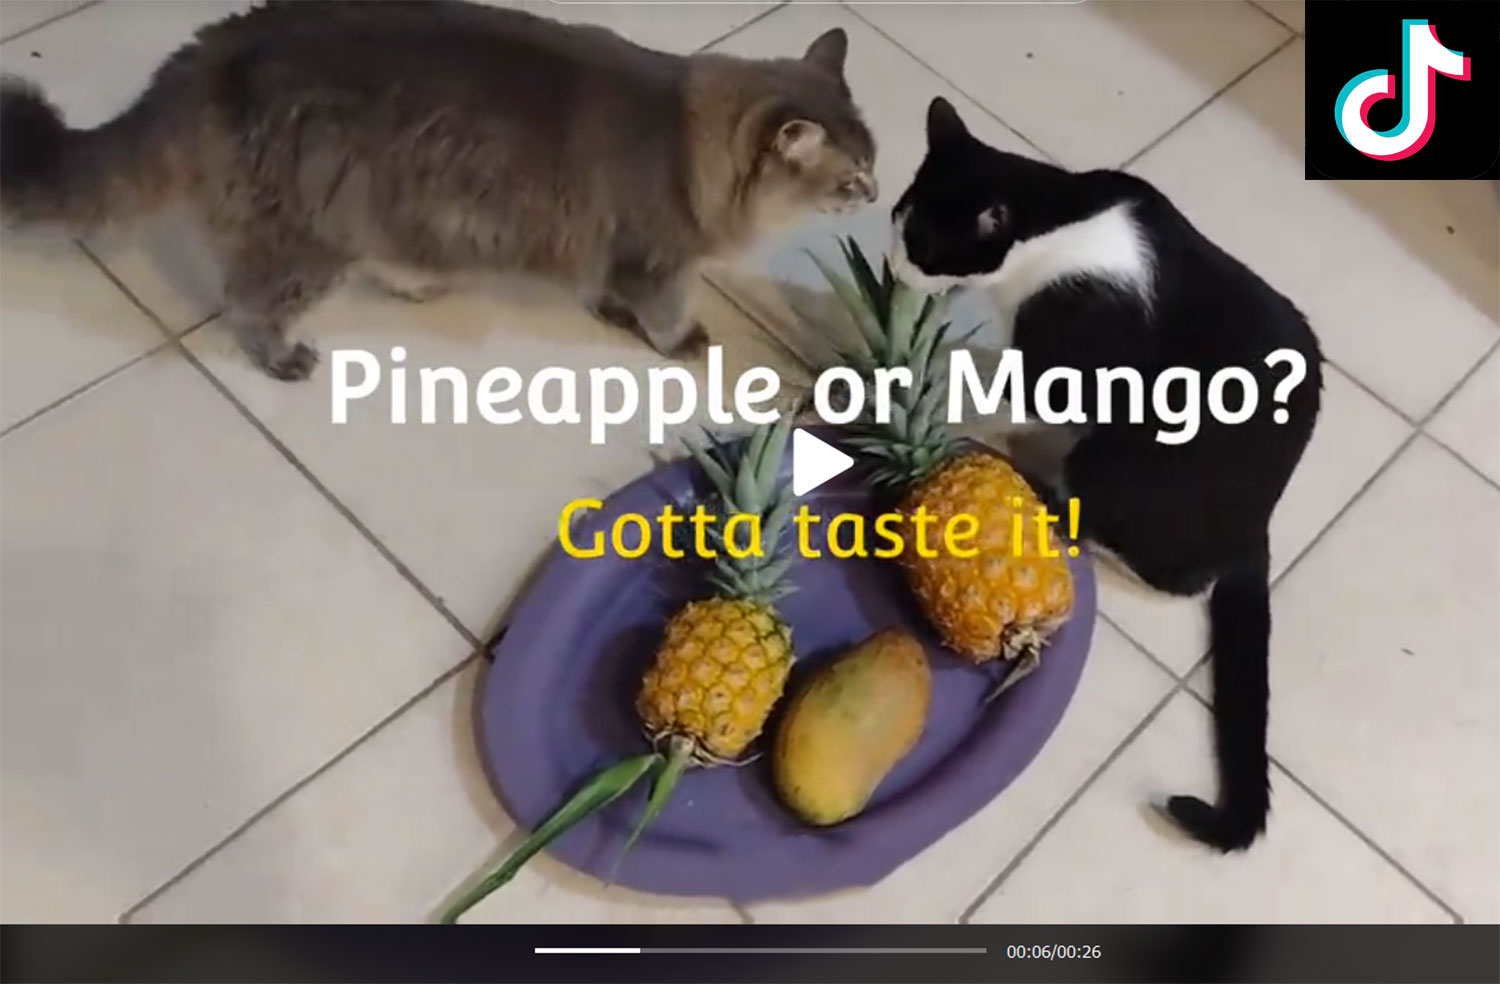 Pineapple, Mango and Cats from Top Tropicals 
TikTok